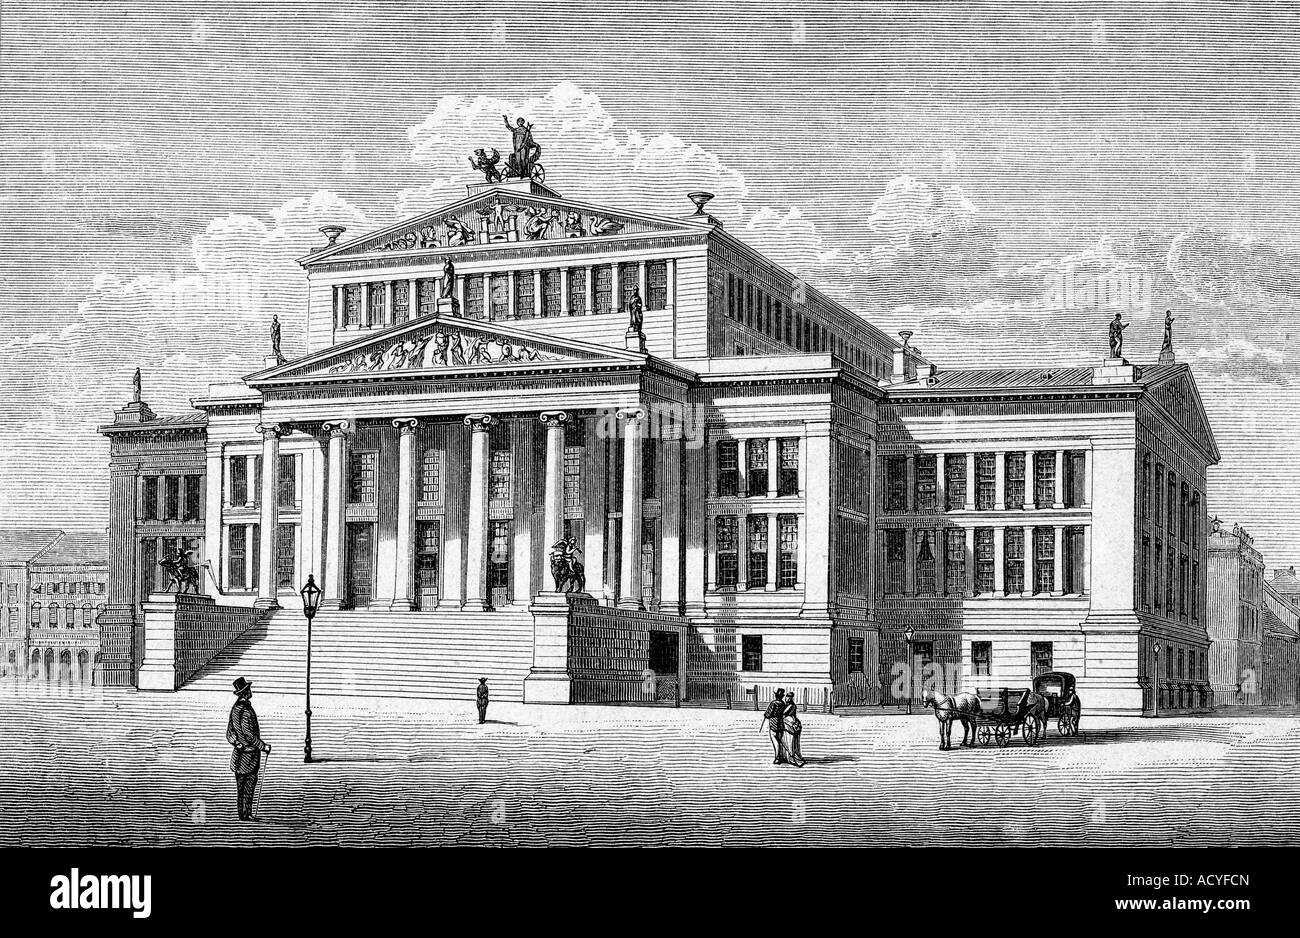 geography/travel, Germany, Berlin, theatres, theatre at Gendarmenmarkt, built 1818 - 1821 by Karl Friedrich Schinkel, engraving, 19th century, Konzerthaus, Concert Hall, neoclassical, architecture, historic, historical, people, Stock Photo